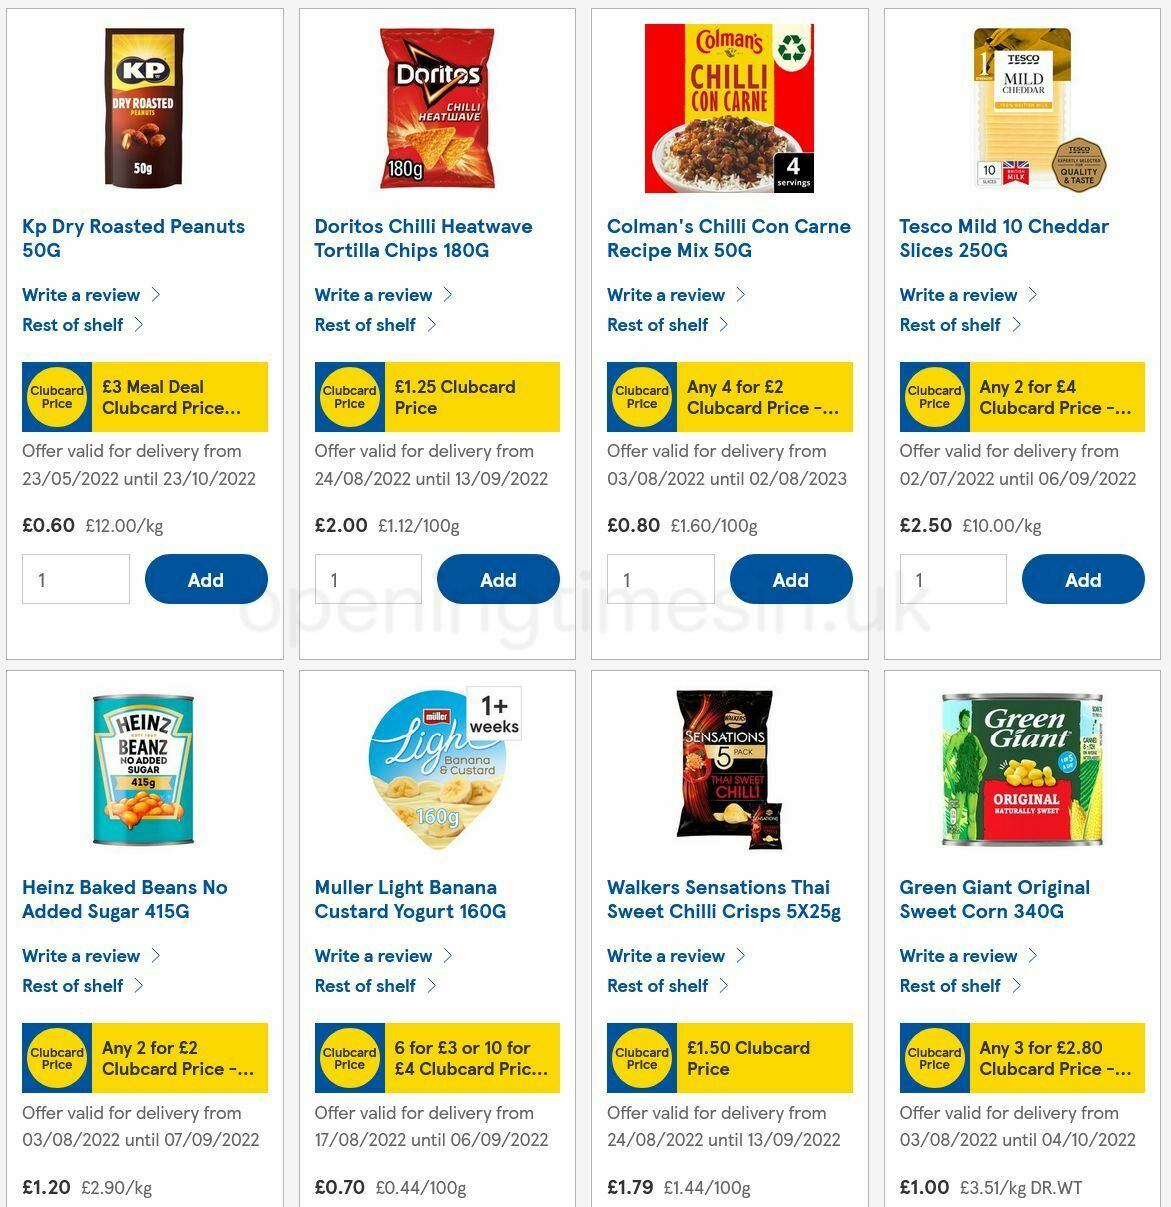 TESCO Offers from 27 August